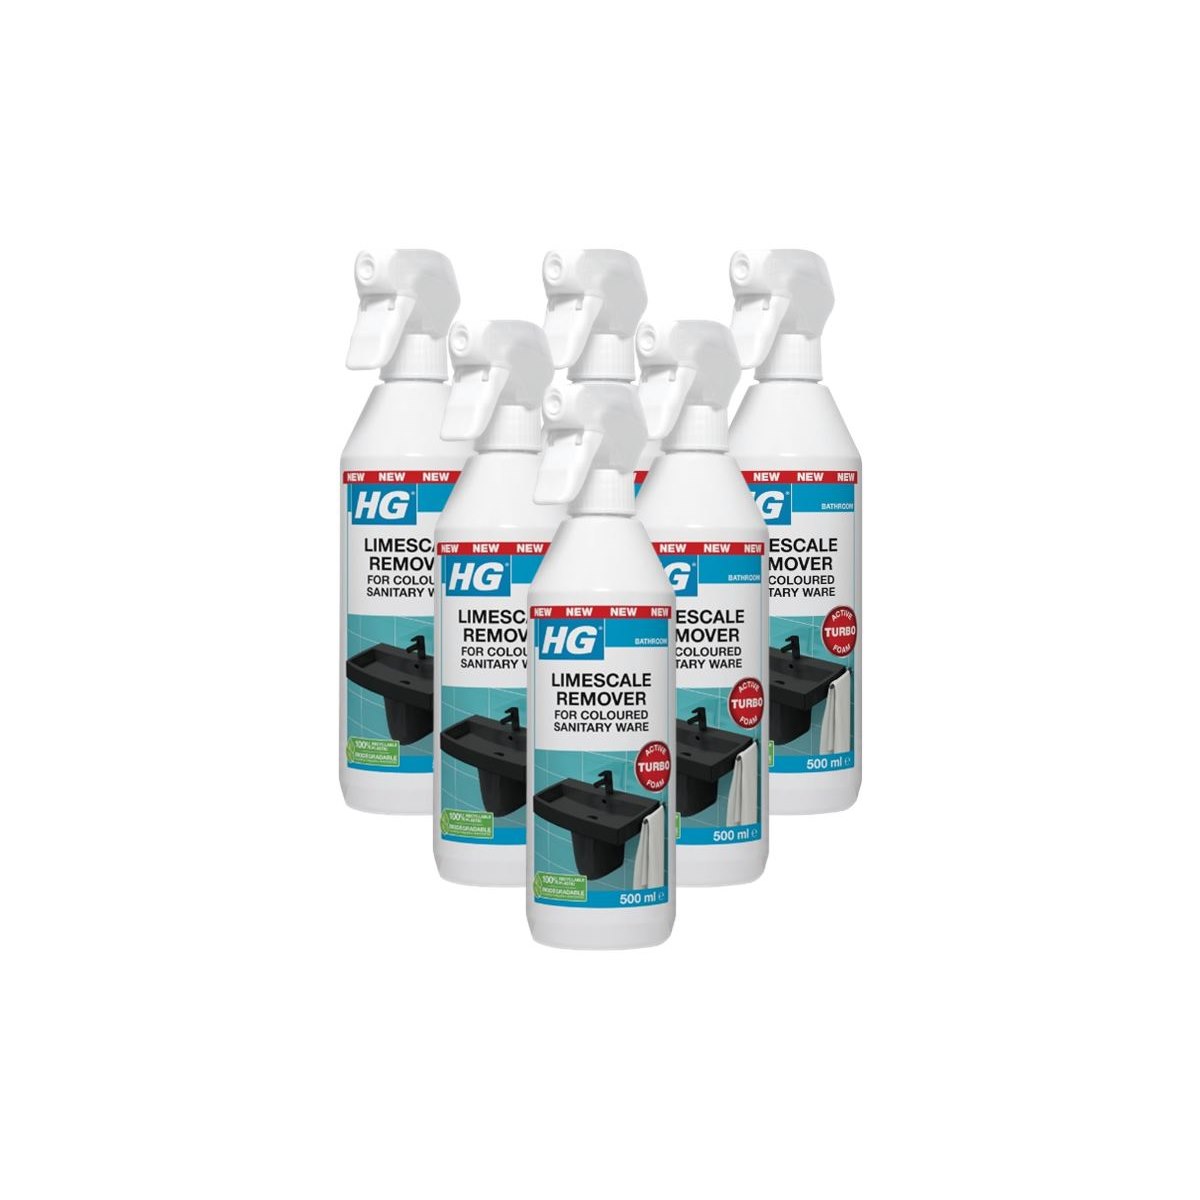 6 x HG Limescale Remover For Coloured Sanitary Ware